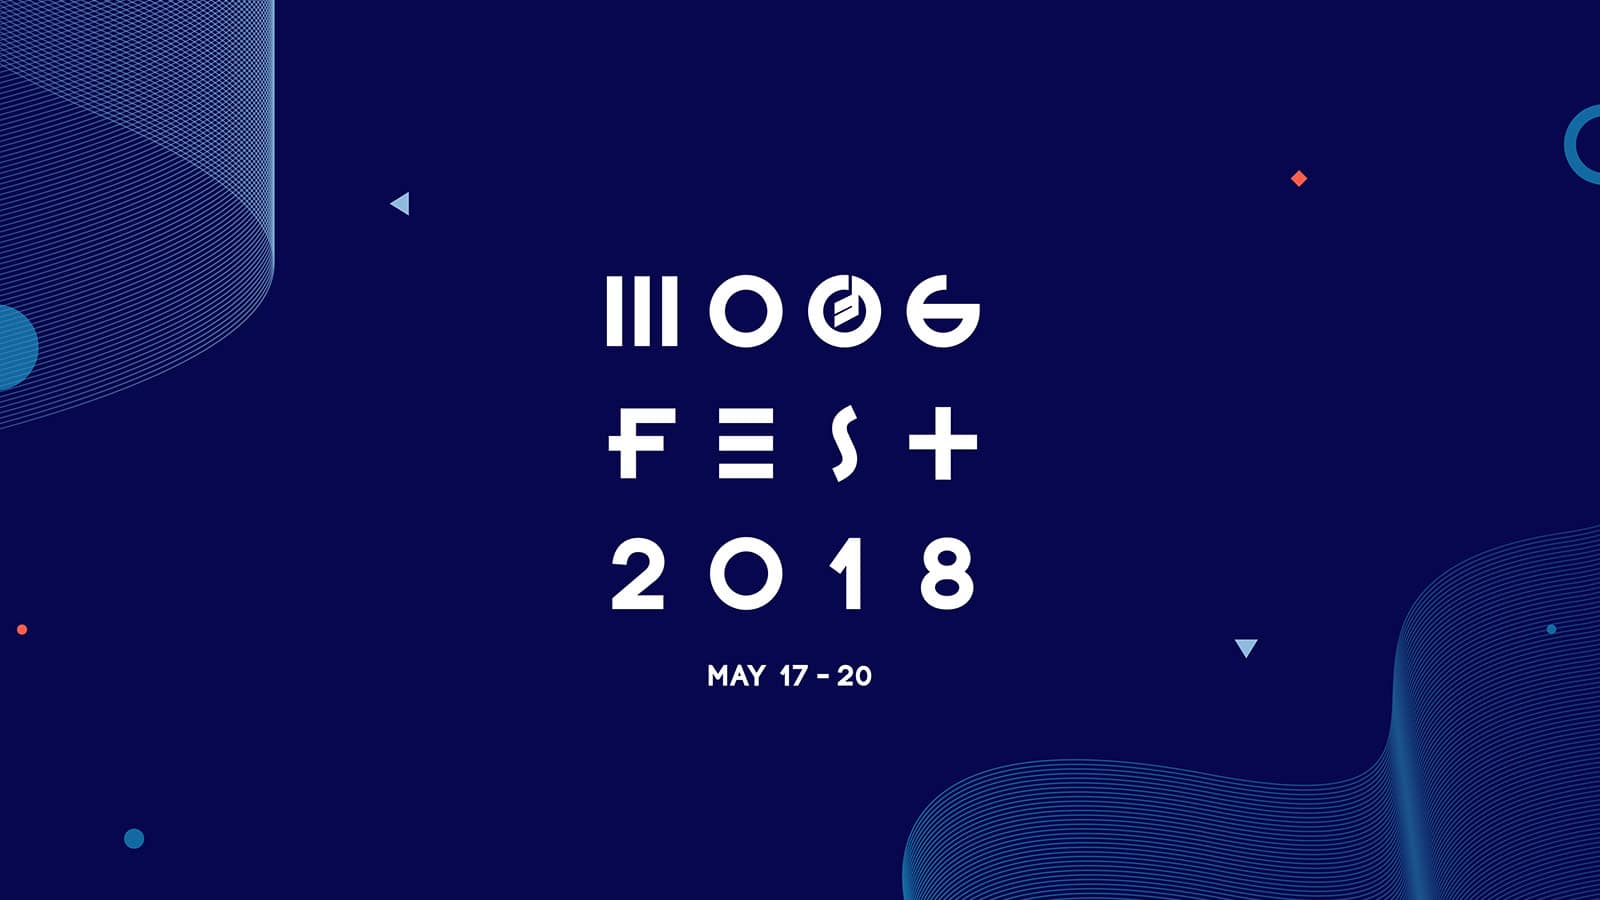 Moogfest Selects Meyer Sound as Official Sound Partner for 2018 and 2019